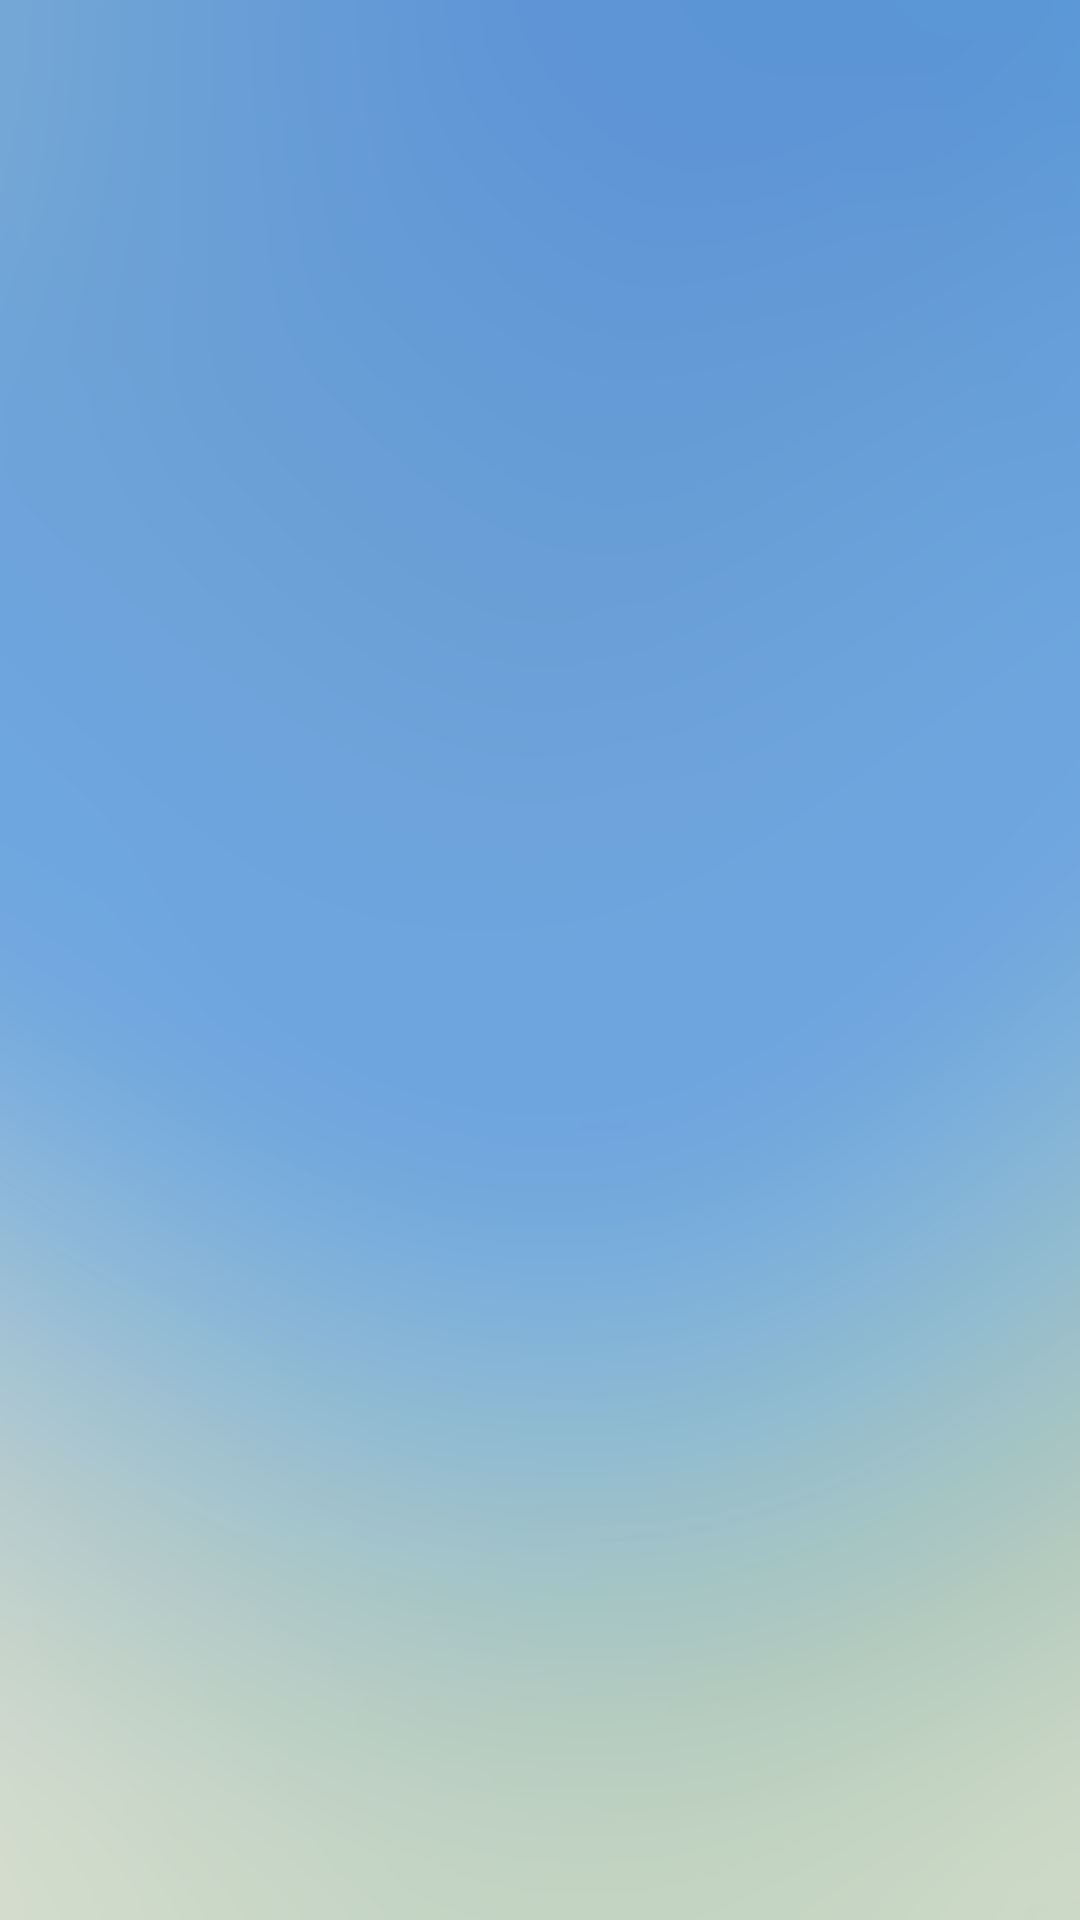 1080x1920 Blue Turquoise Gradient Minimal Android Wallpaper ...